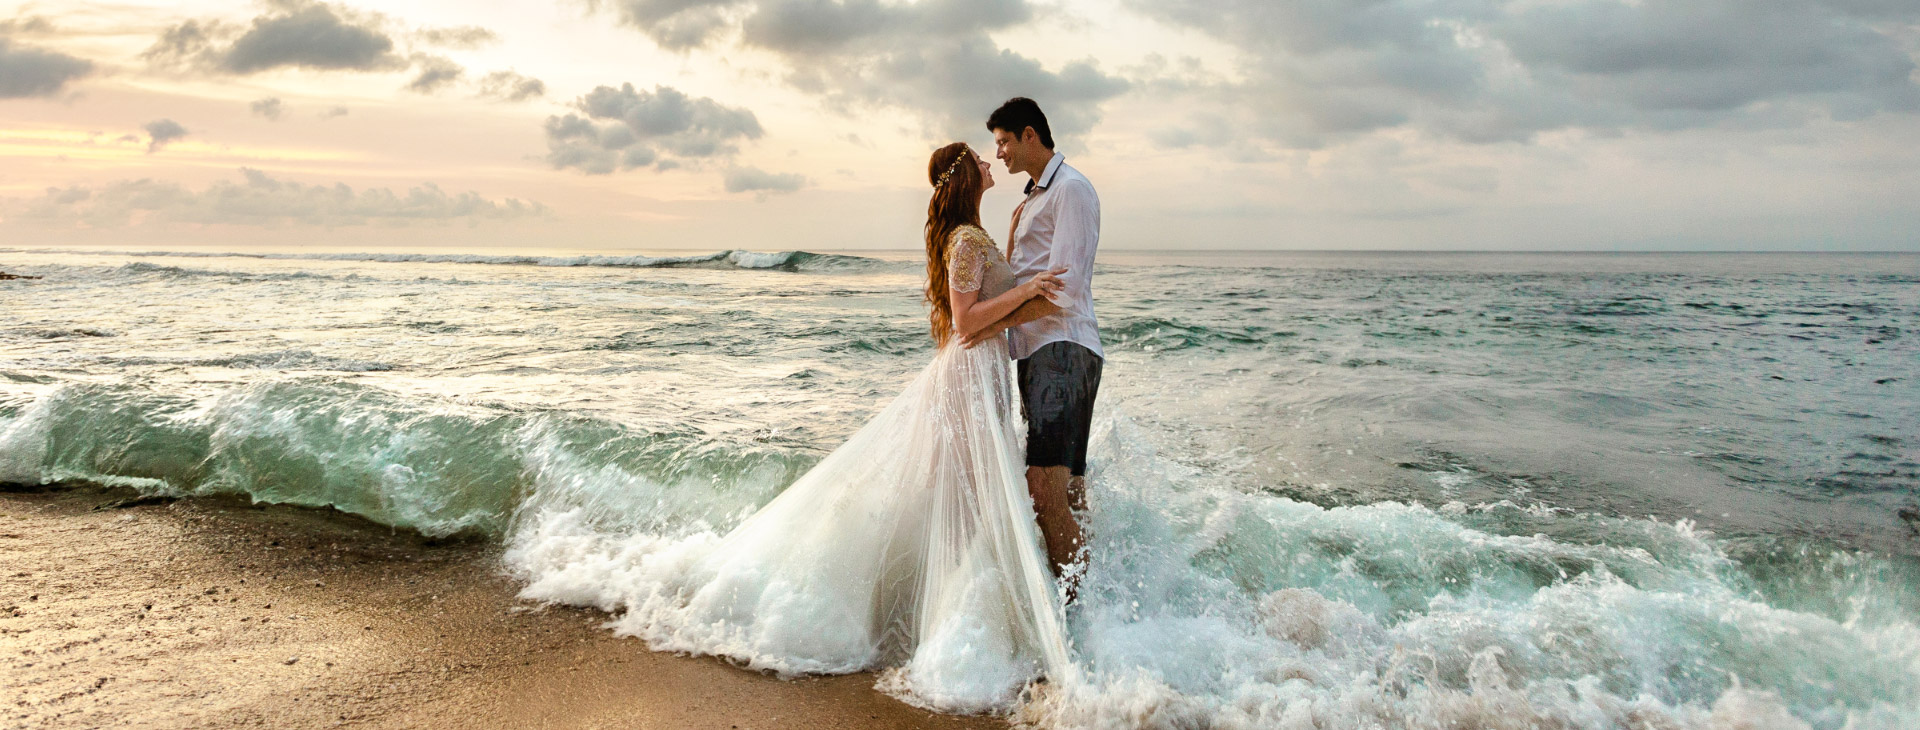 bride and groom hugging on the beach